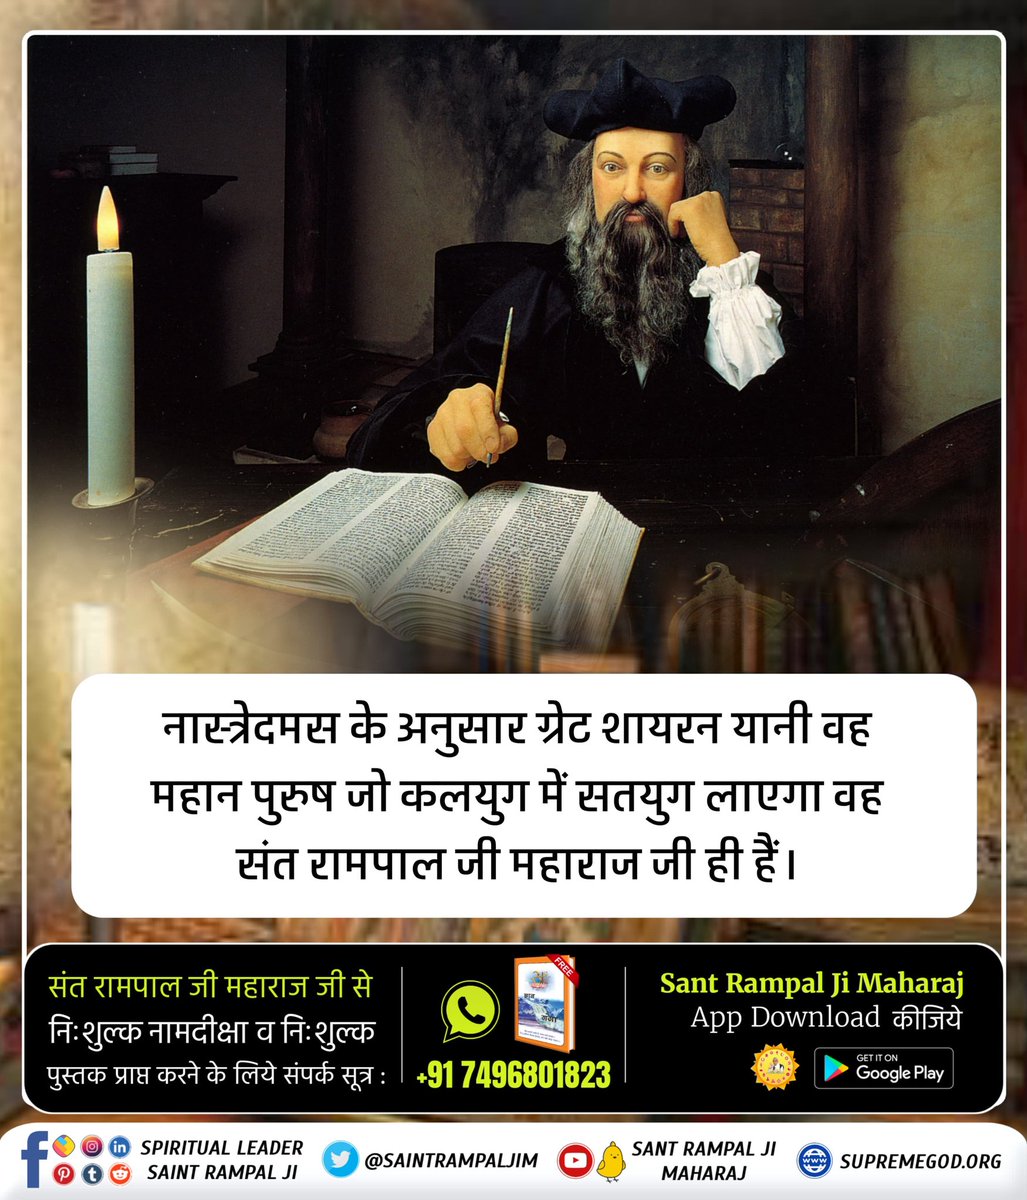 #GodMorningFriday
#आदि_सनातनधर्म_होगाप्रतिष्ठित
Nostradamus's prophecy about Purna Sant Rampal Ji Maharaj who established ancient Sanatan Dharma
The followers will get unique spiritual and material benefits from the path shown by that great saint.
Daily Watch Sadhna TV from 7'30